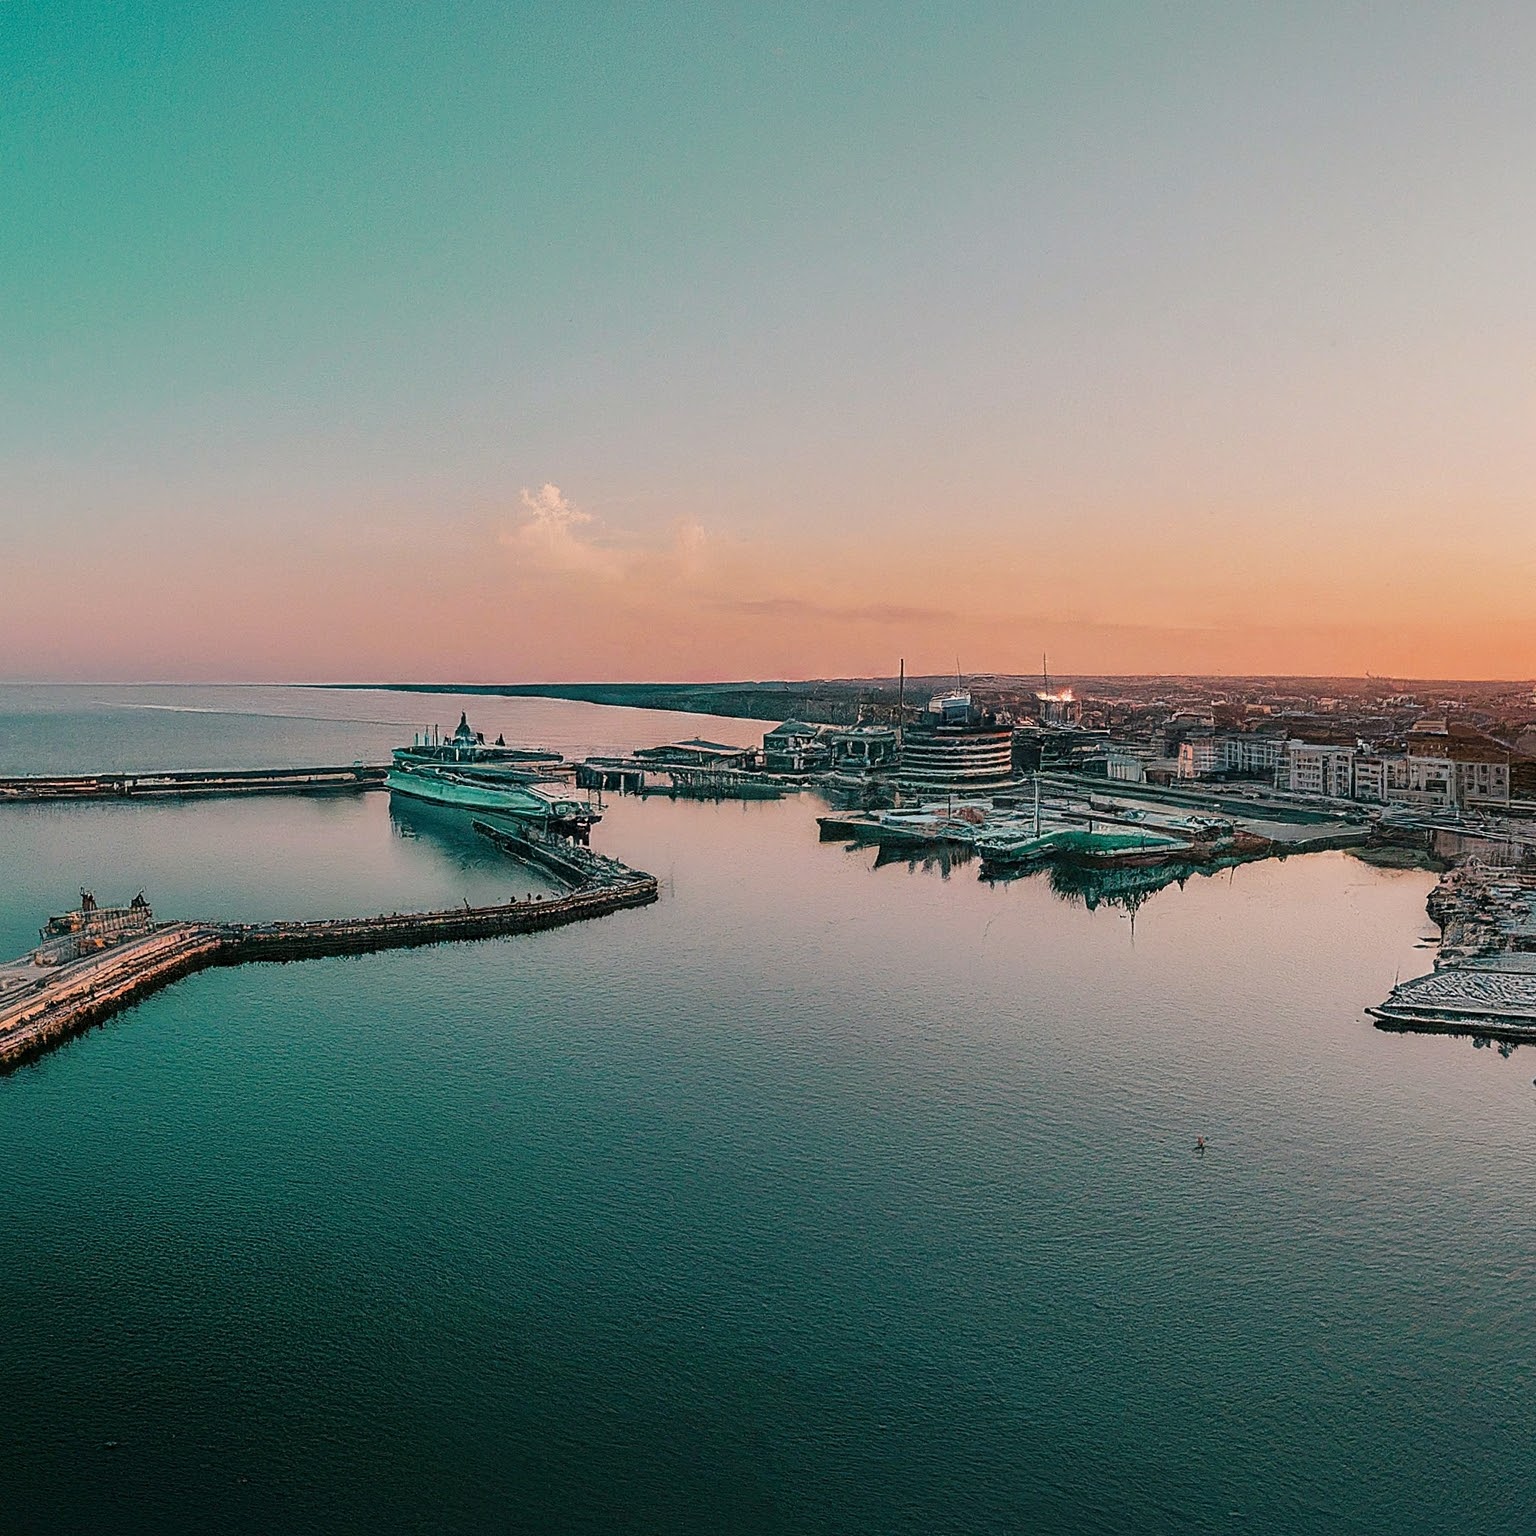 Panoramic view of Constanta Harbor, Romania, with ships and the city skyline.